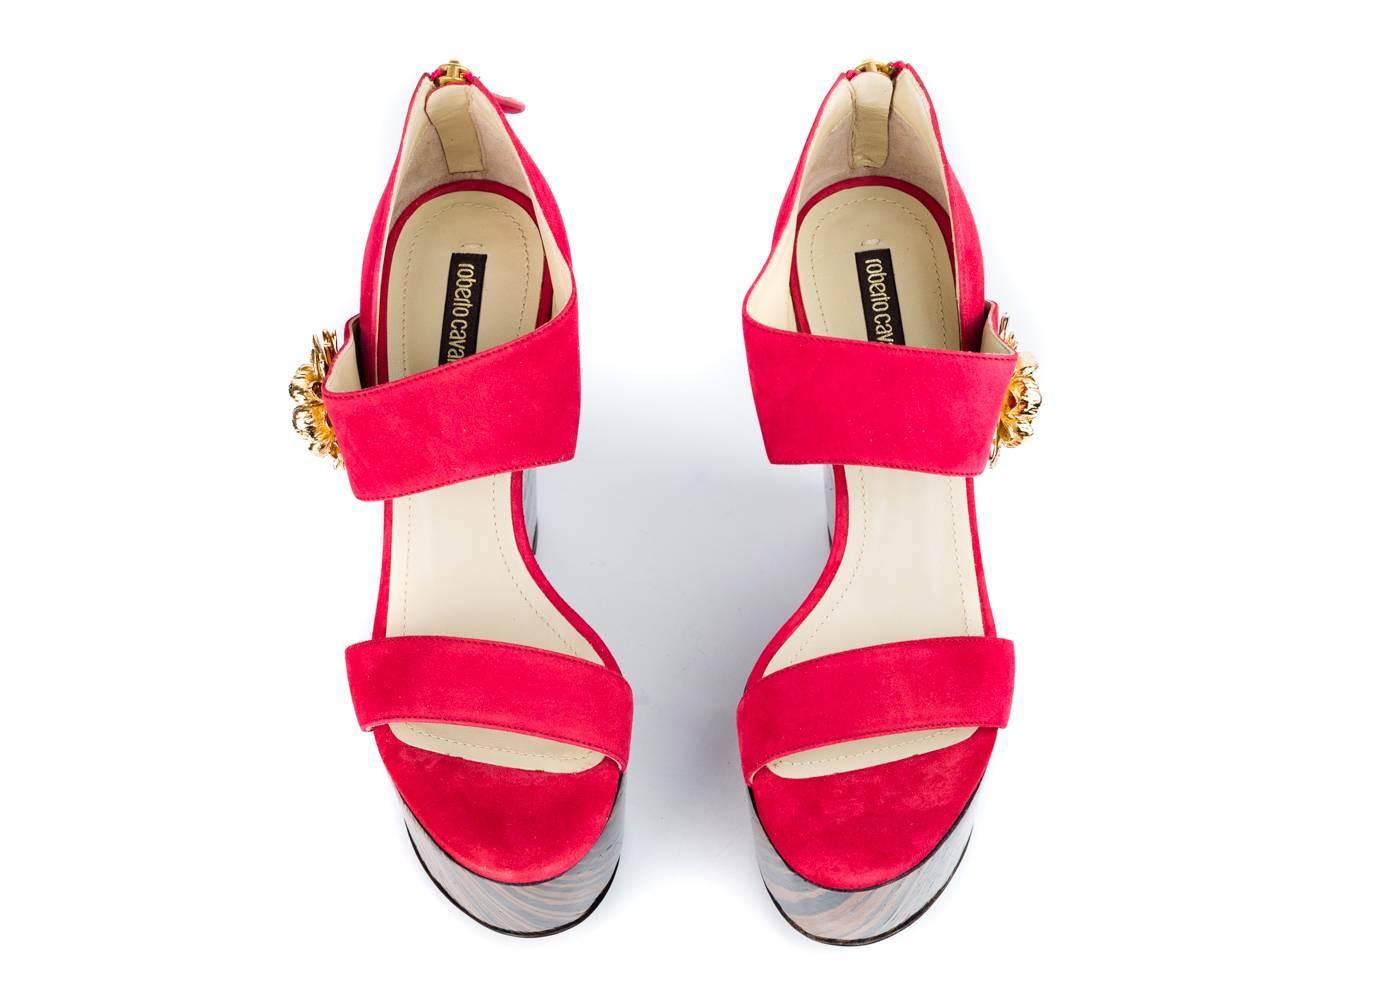 Brand New Roberto Cavalli Wedges
Original Box and Dust Bag Included
Retails in Stores and Online for $1295
Size IT 37 / US 7 Fits True to Size

These unique sandal wedges with a gorgeous bold red color suede will make a statement no matter where you